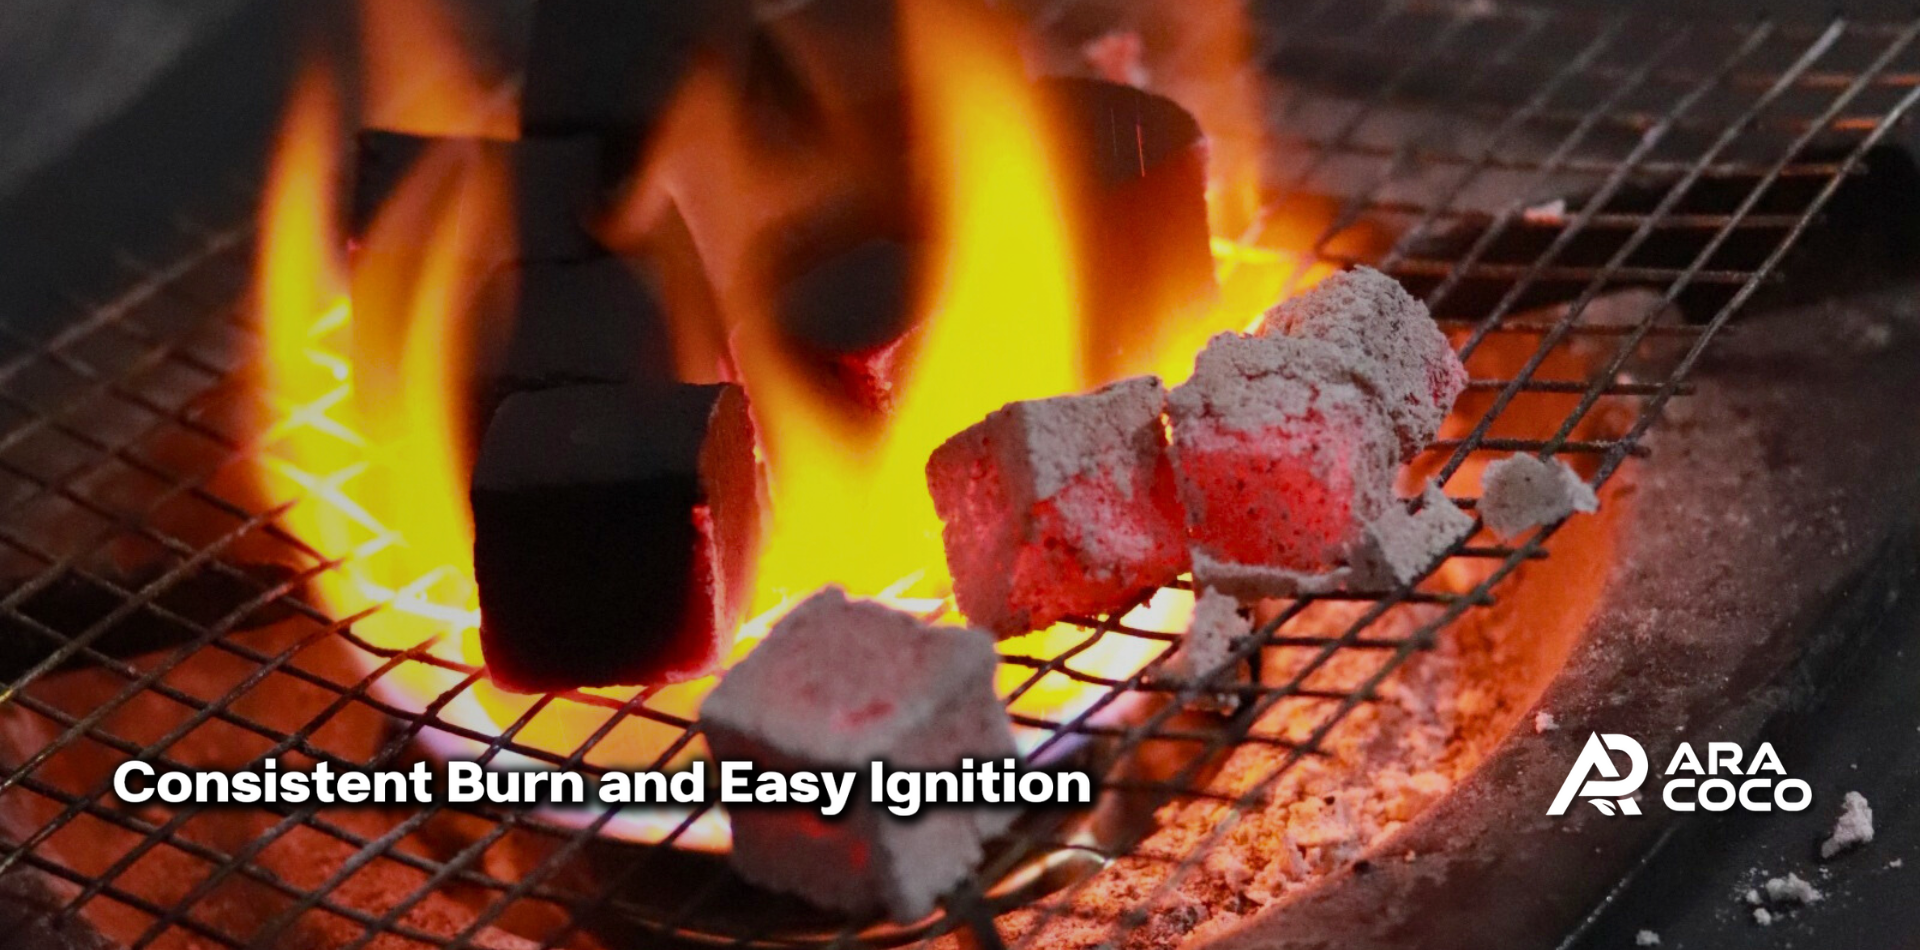 Another notable feature of coconut shell charcoal briquettes is their uniform shape, which guarantees a consistent burning time and stable heat.